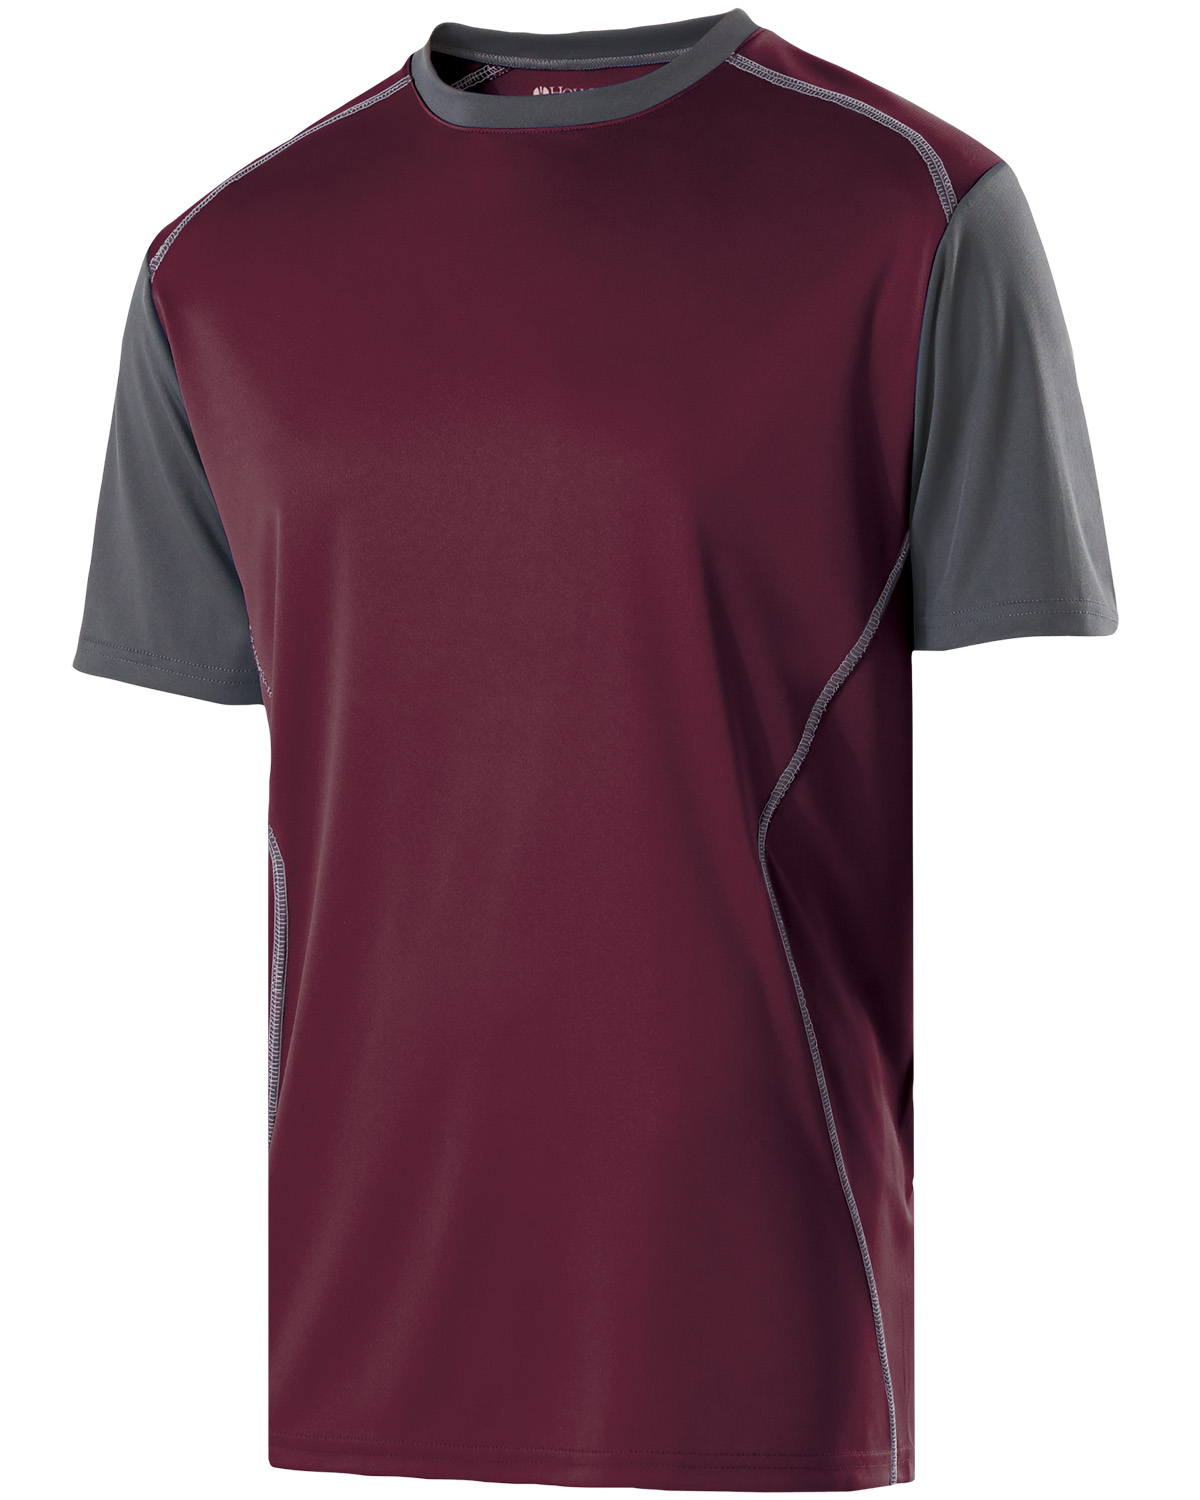 click to view DK MAROON/ CARBN